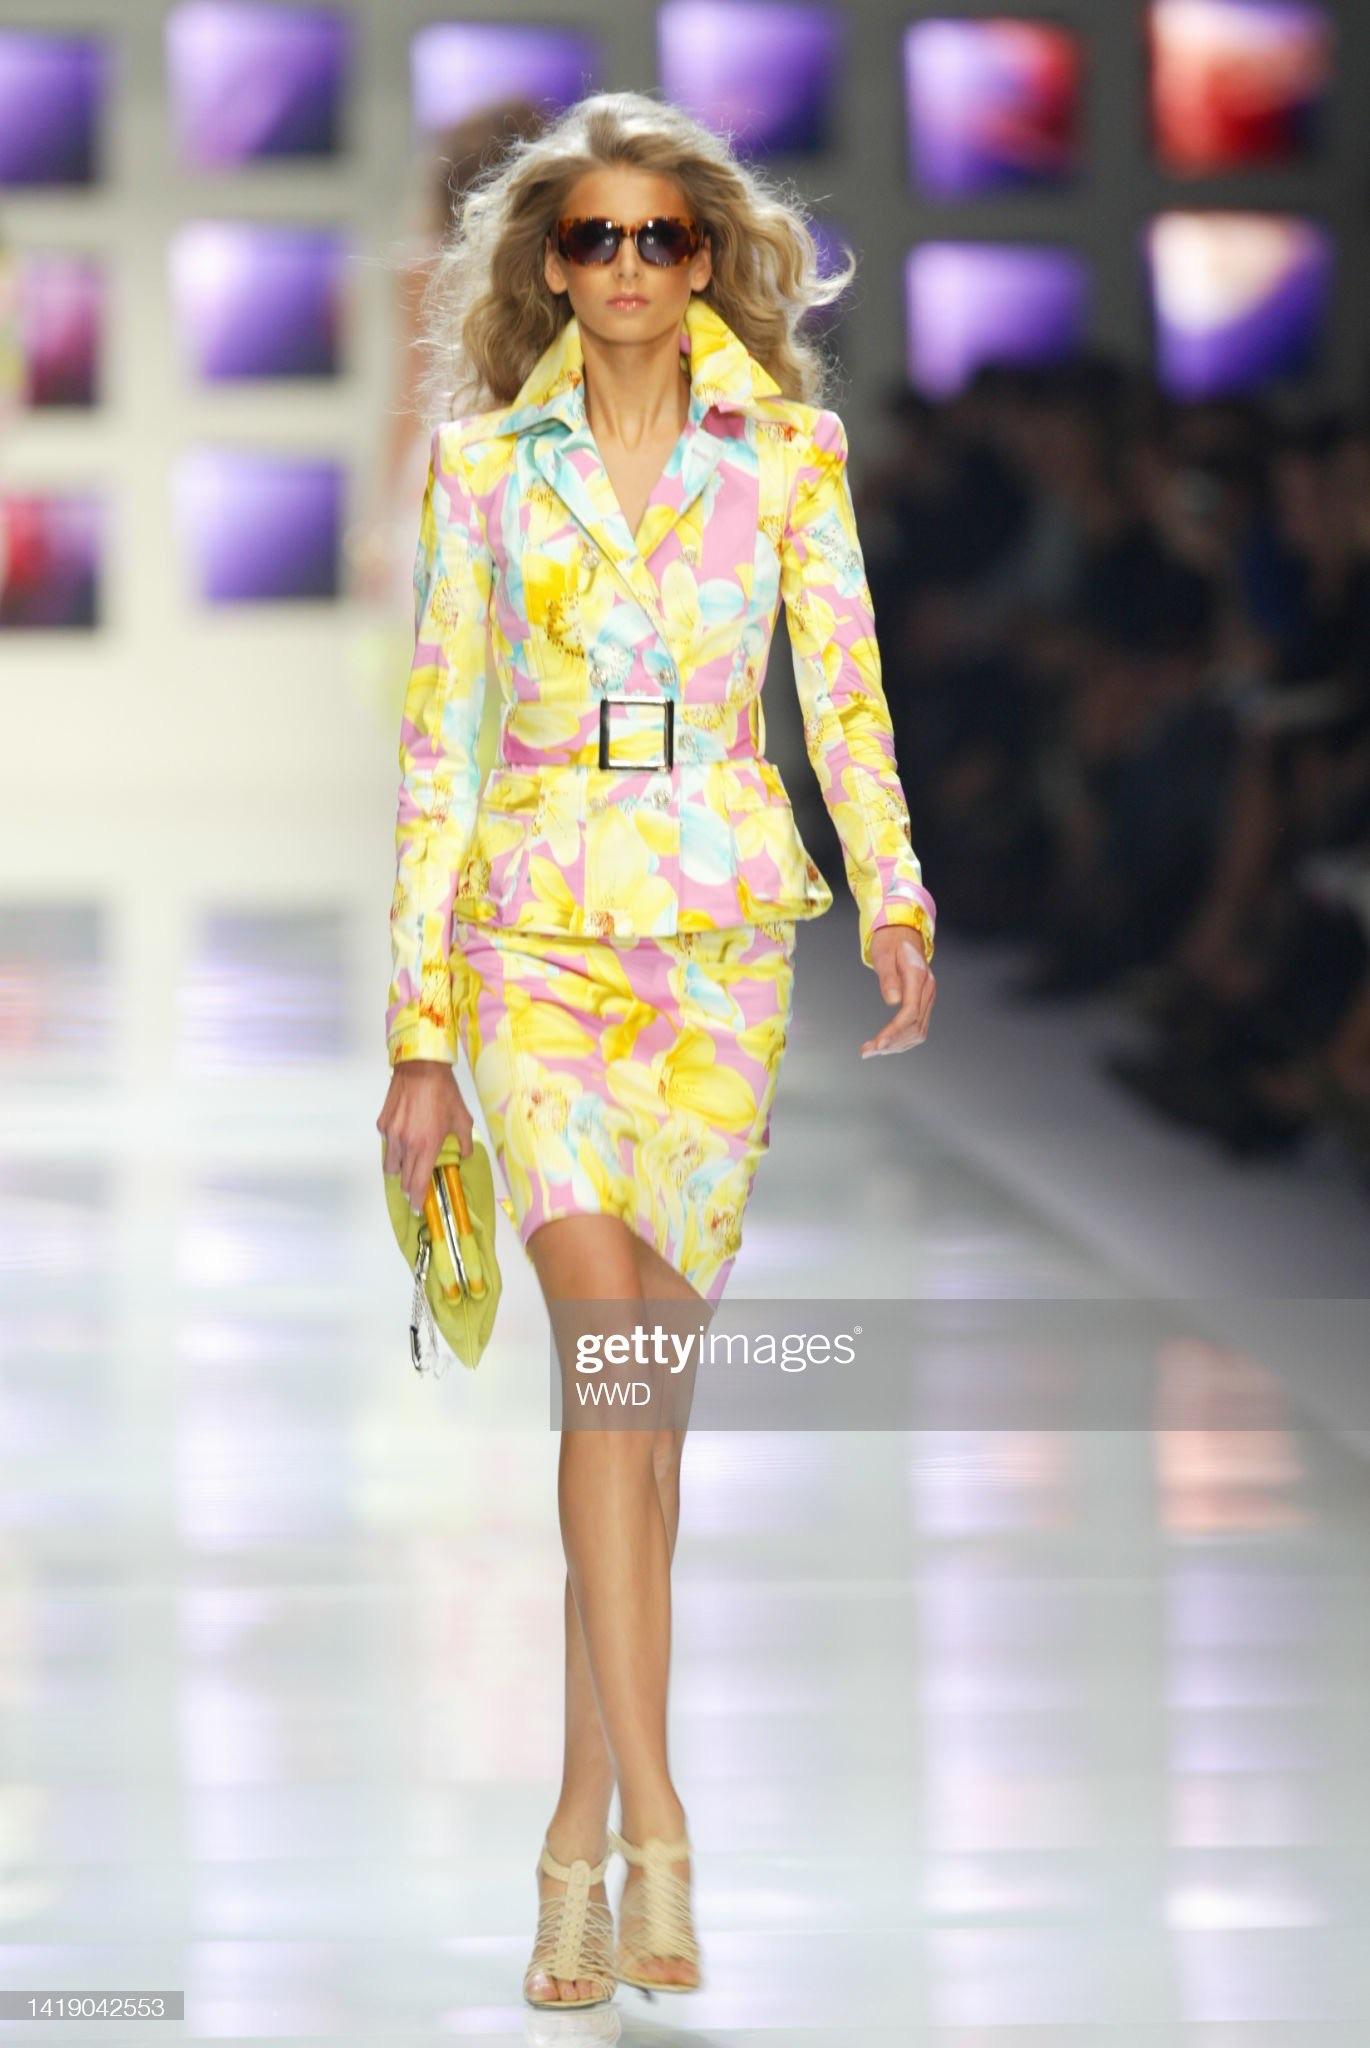 Presenting a vibrant floral yellow Versace skirt suit, designed by Donatella Versace. From the Spring/Summer 2004 collection, this set debuted on the runway as look 7, modeled by Hana Soukupova. A fusion of femininity and sophistication, the